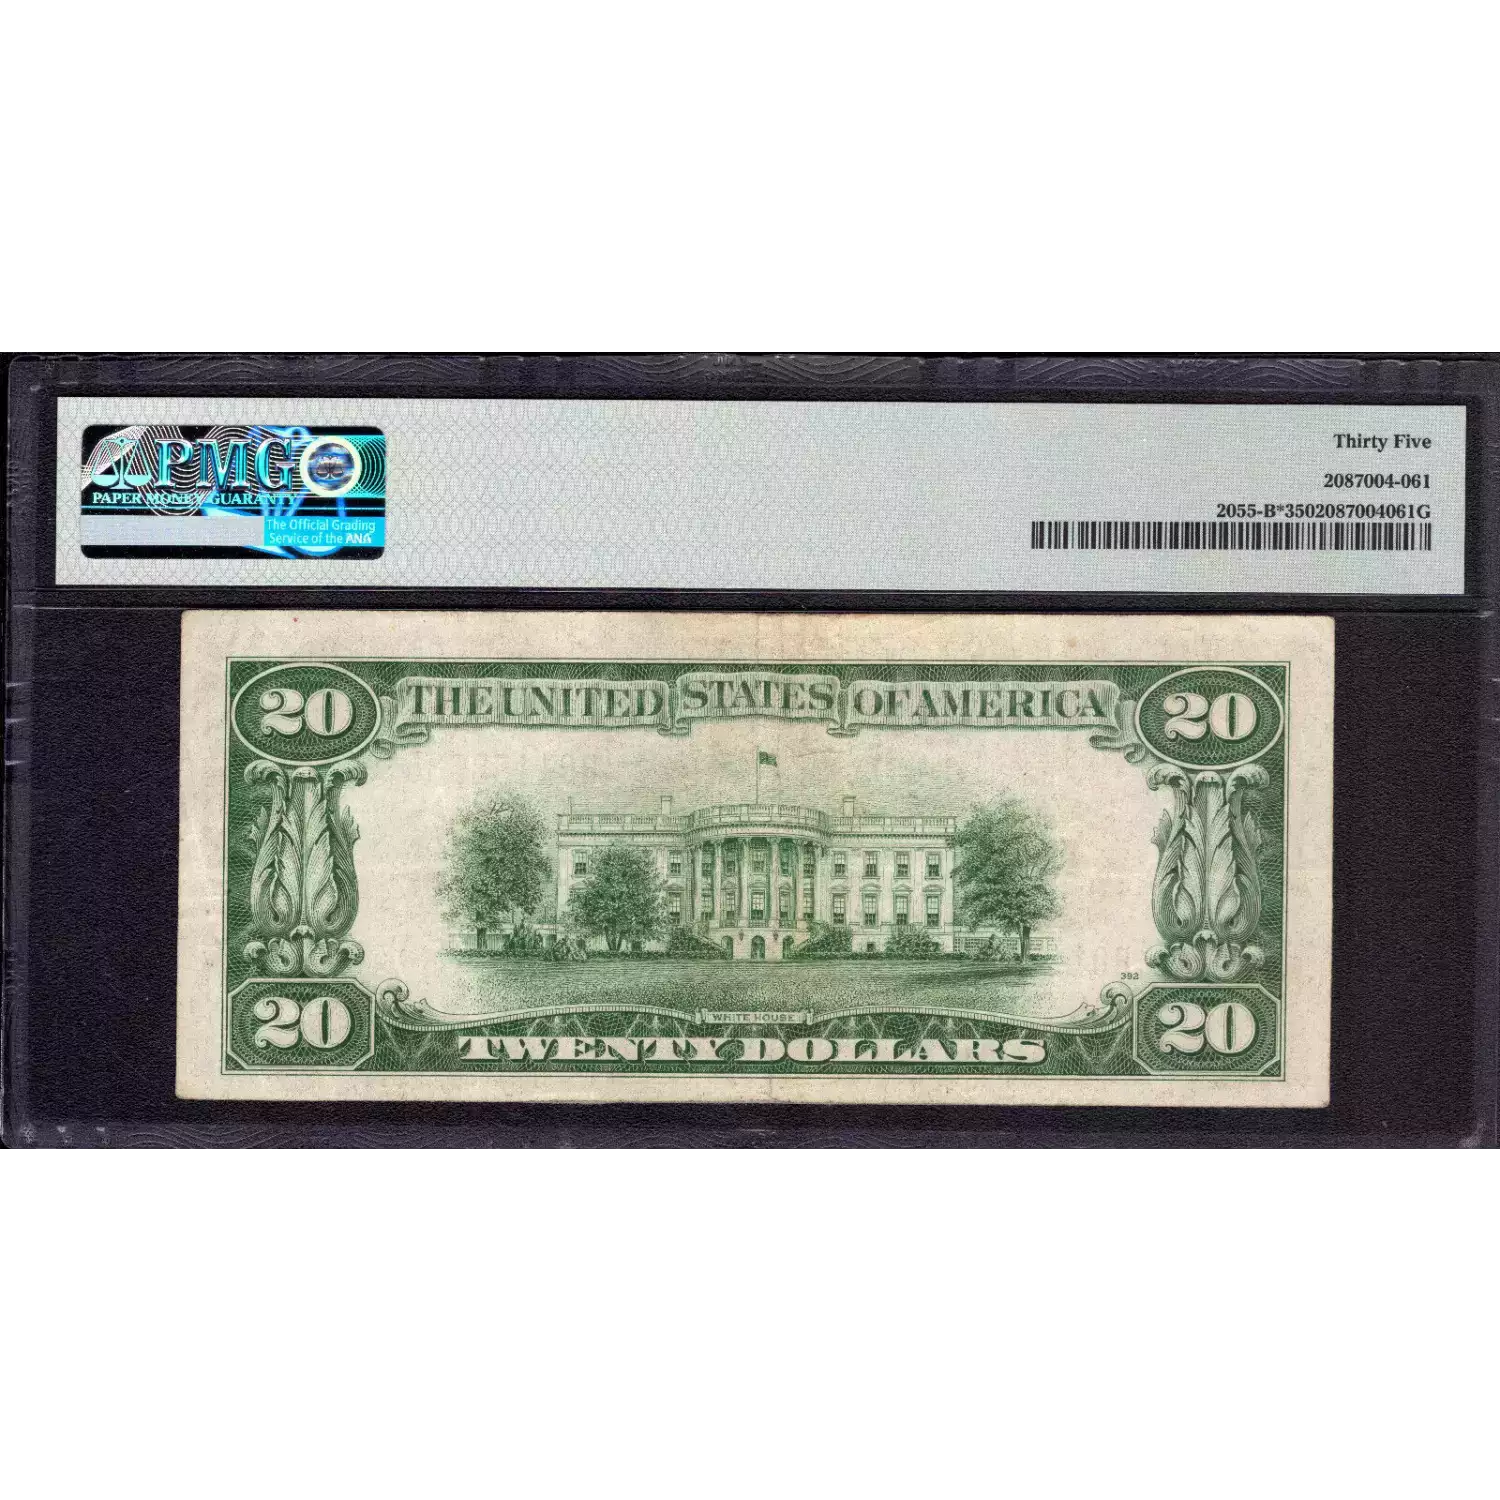 $20 1934-A. blue-Green seal. Small Size $20 Federal Reserve Notes 2055-B* (2)